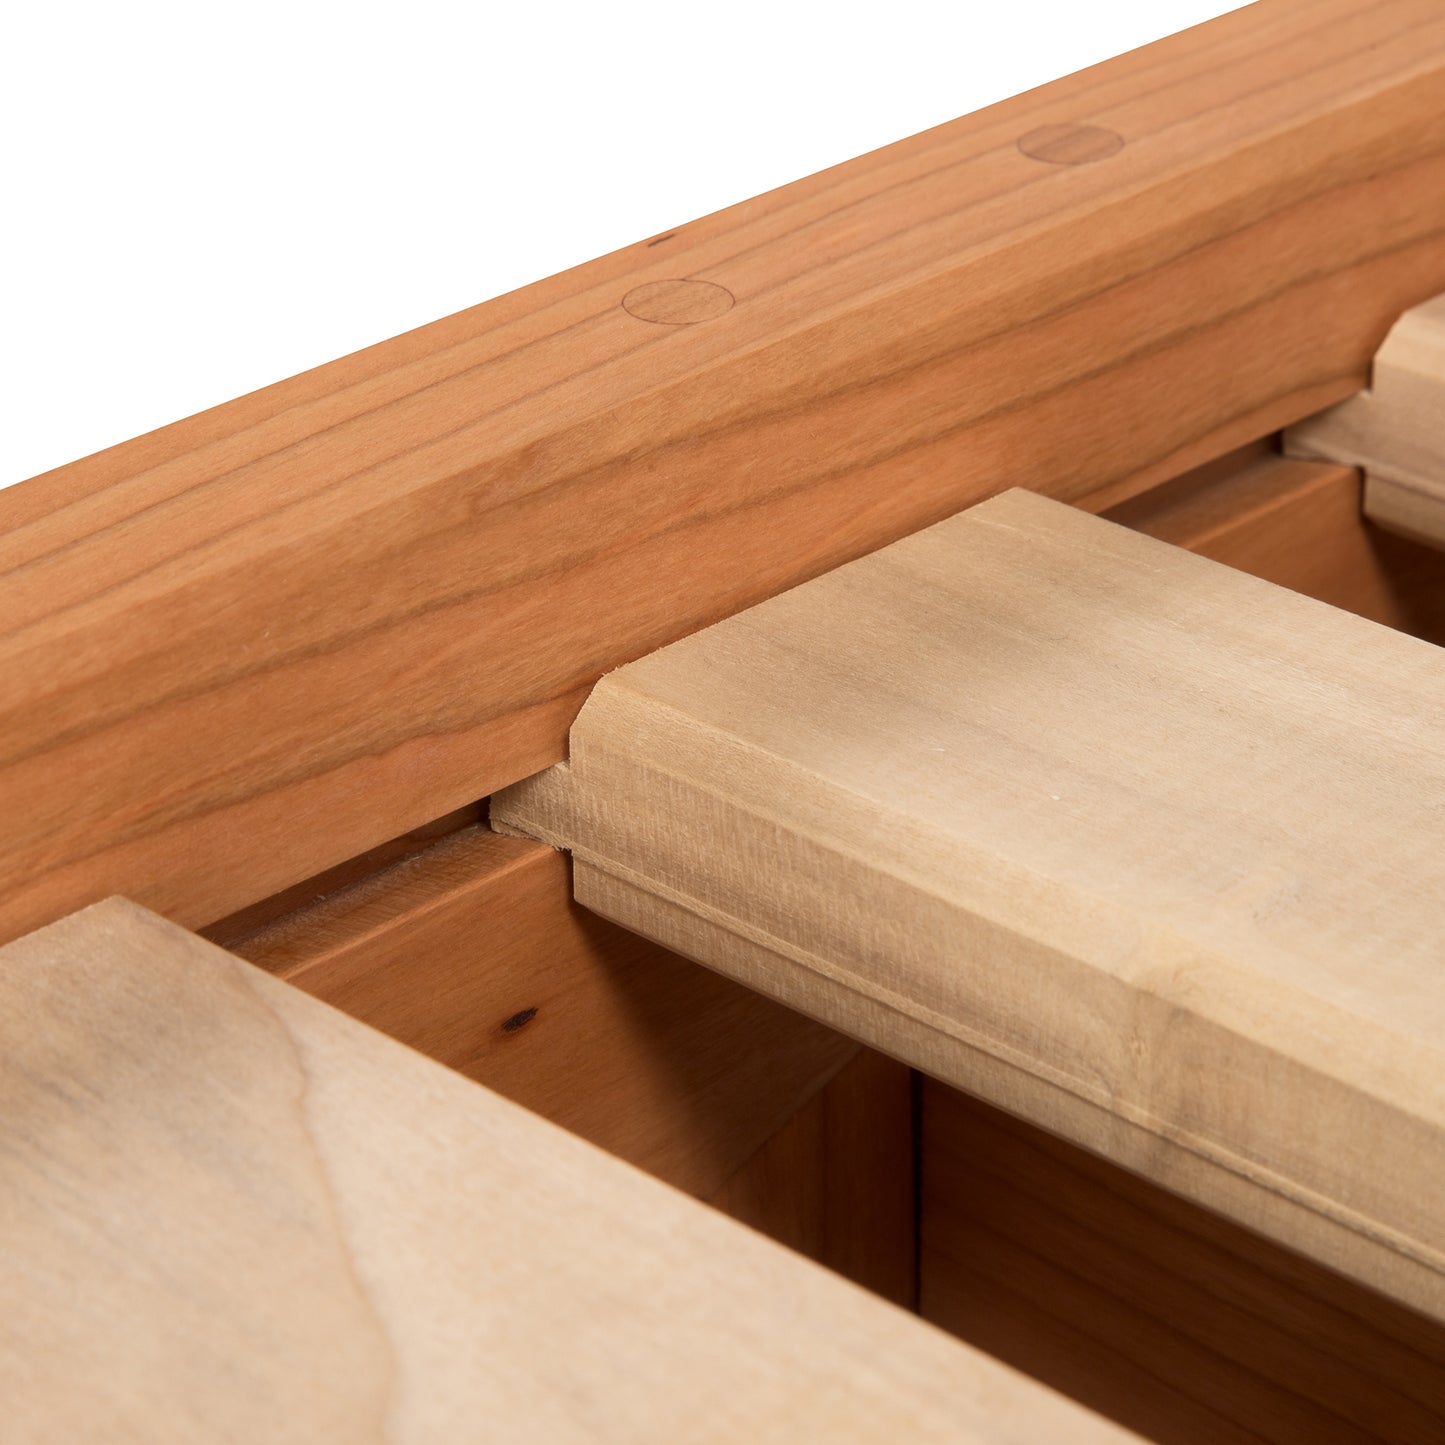 Close-up of a wooden drawer partially opened, showing the craftsmanship with visible dovetail joints and wood grain texture. An eco-friendly oil finish enhances the Maple Corner Woodworks Cherry Moon Dovetail Platform Bed detail against a neutral background.